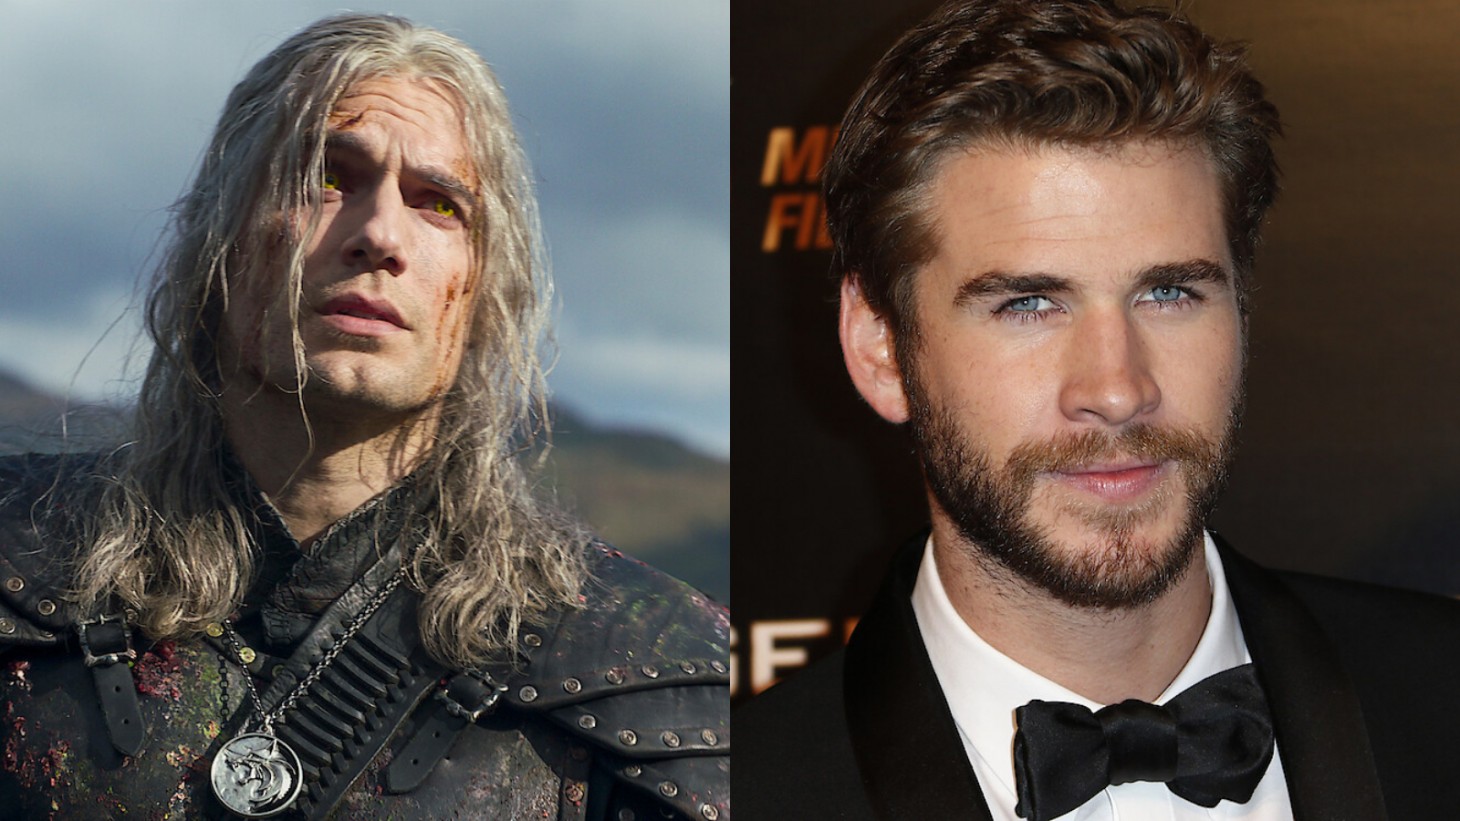 Superman actor Henry Cavill wants to play Geralt in the Witcher Netflix  series